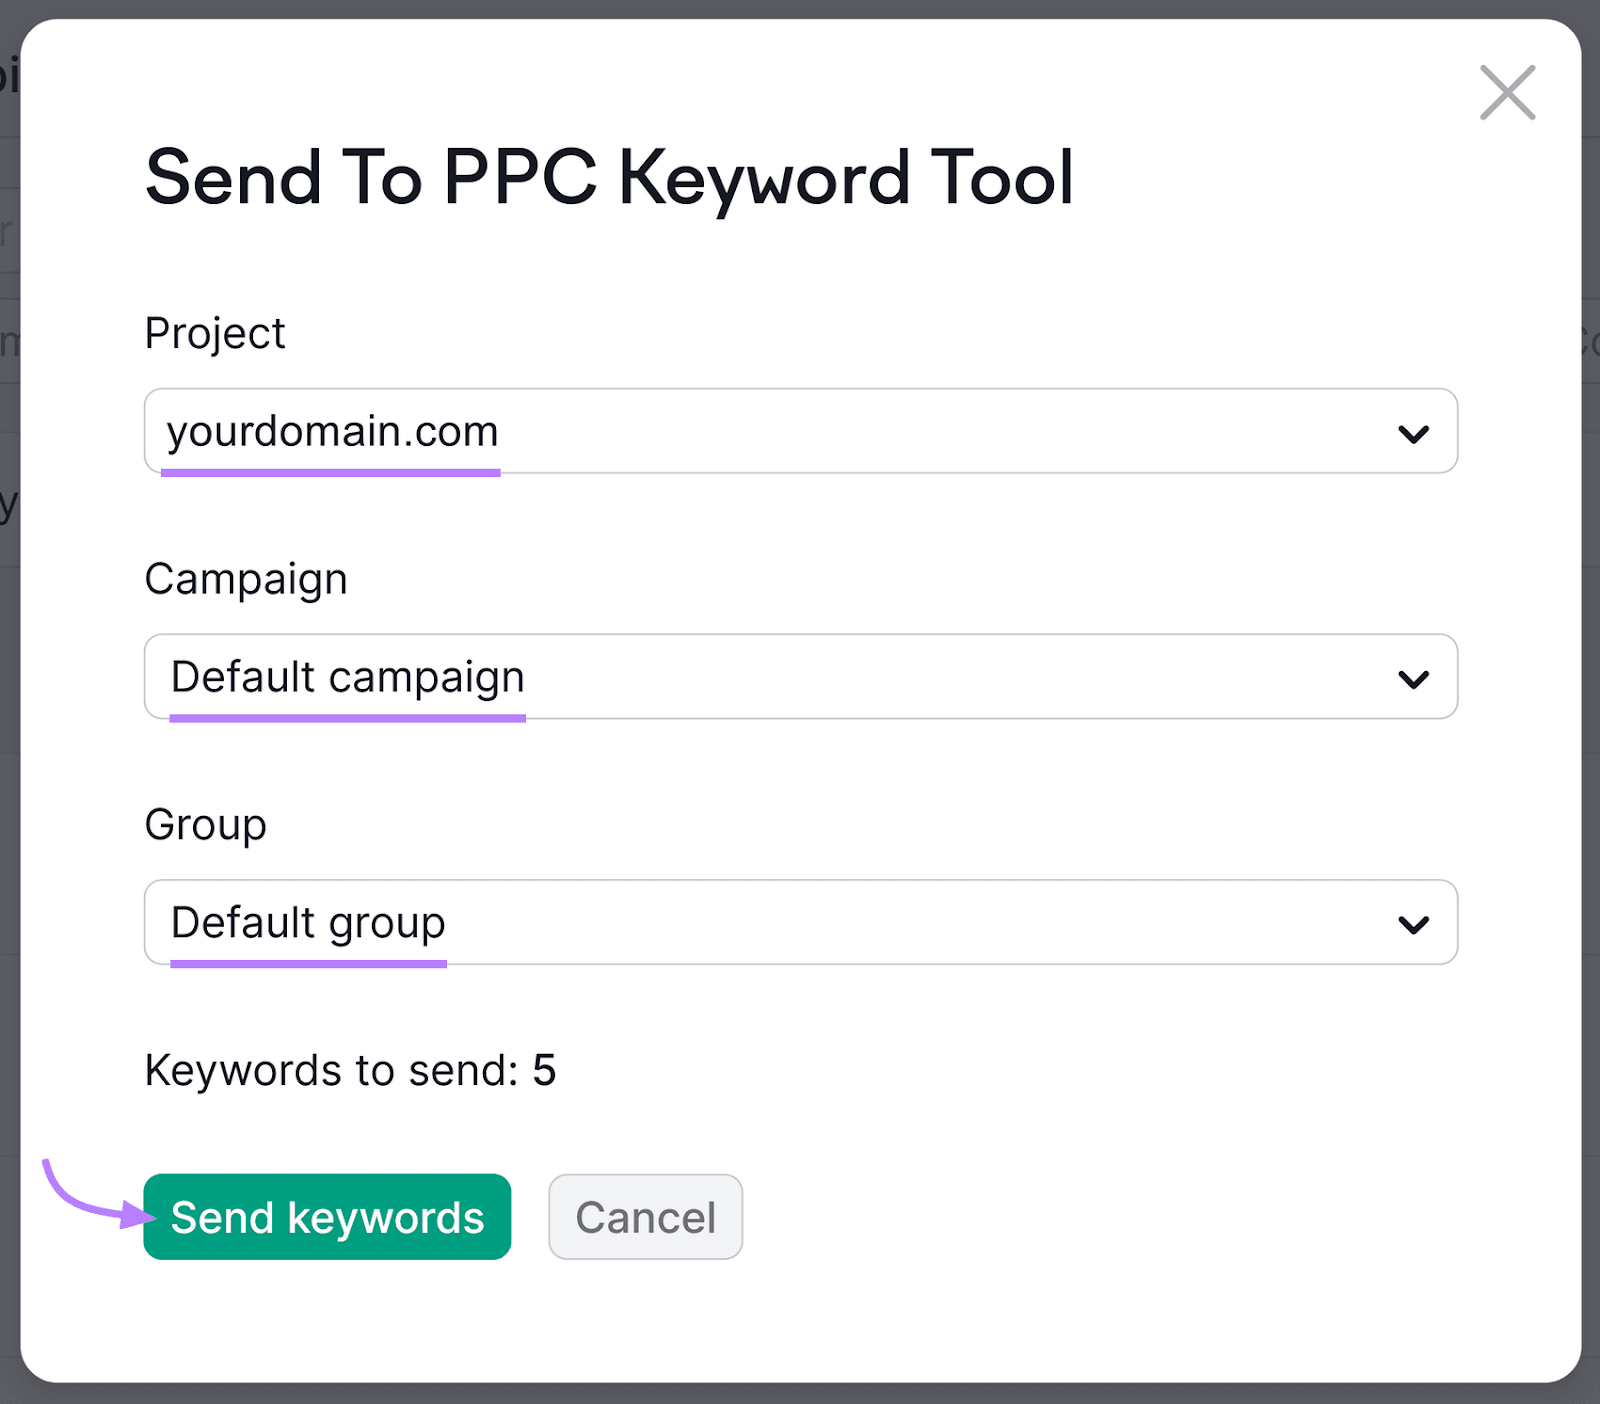 "Send To PPC Keyword Tool" screen with a focus on fields for "Project," "Campaign," "Group," and "Send keywords" button.